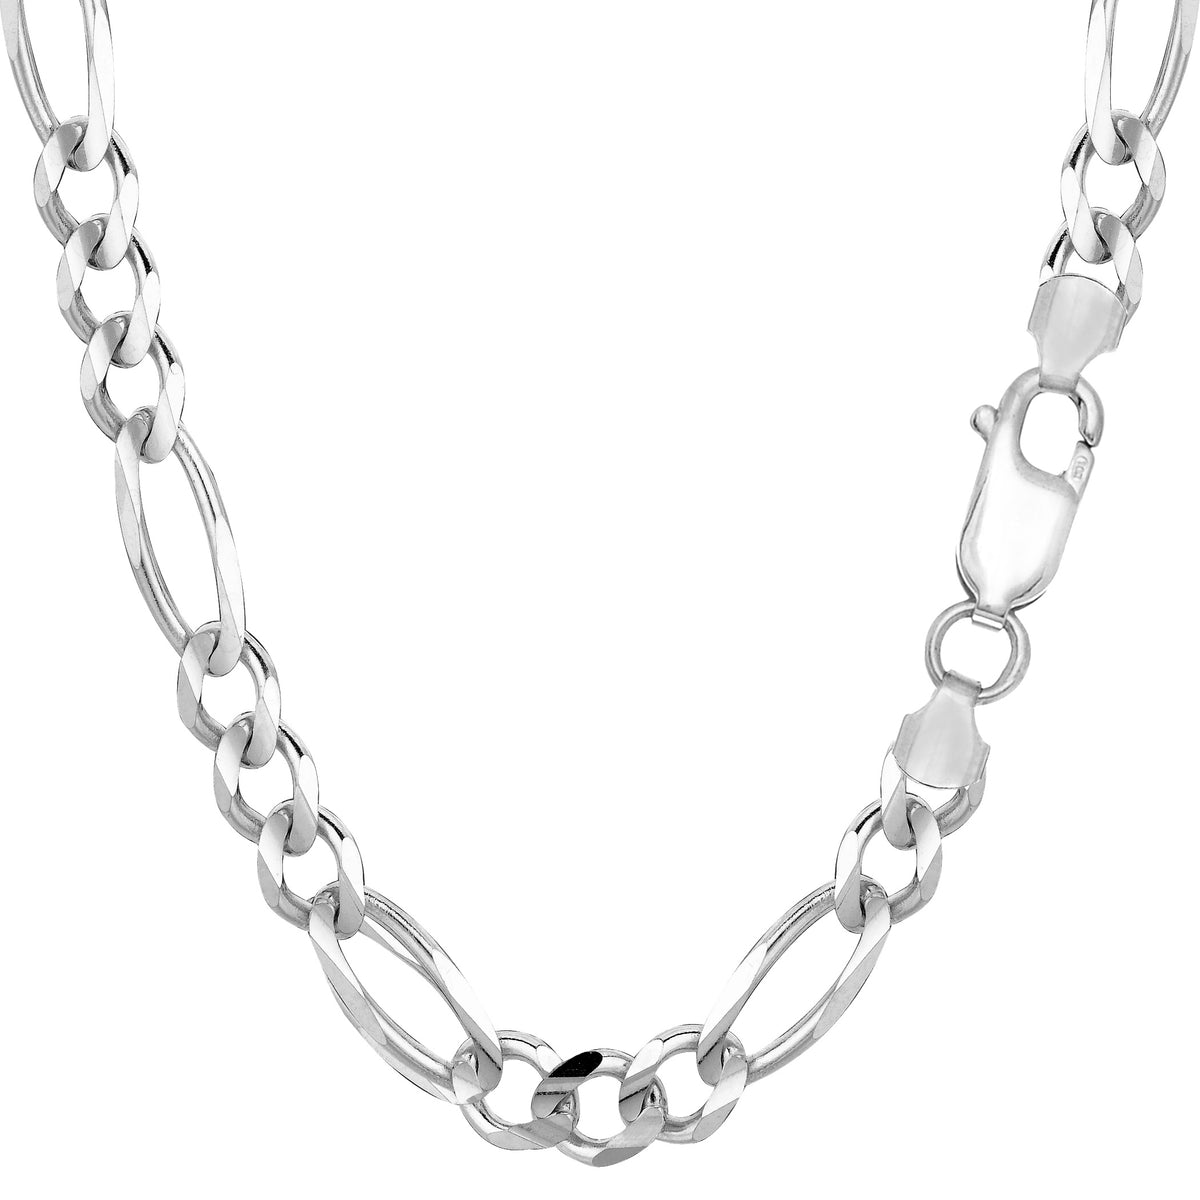 14k White Solid Gold Figaro Chain Necklace, 6.0mm fine designer jewelry for men and women